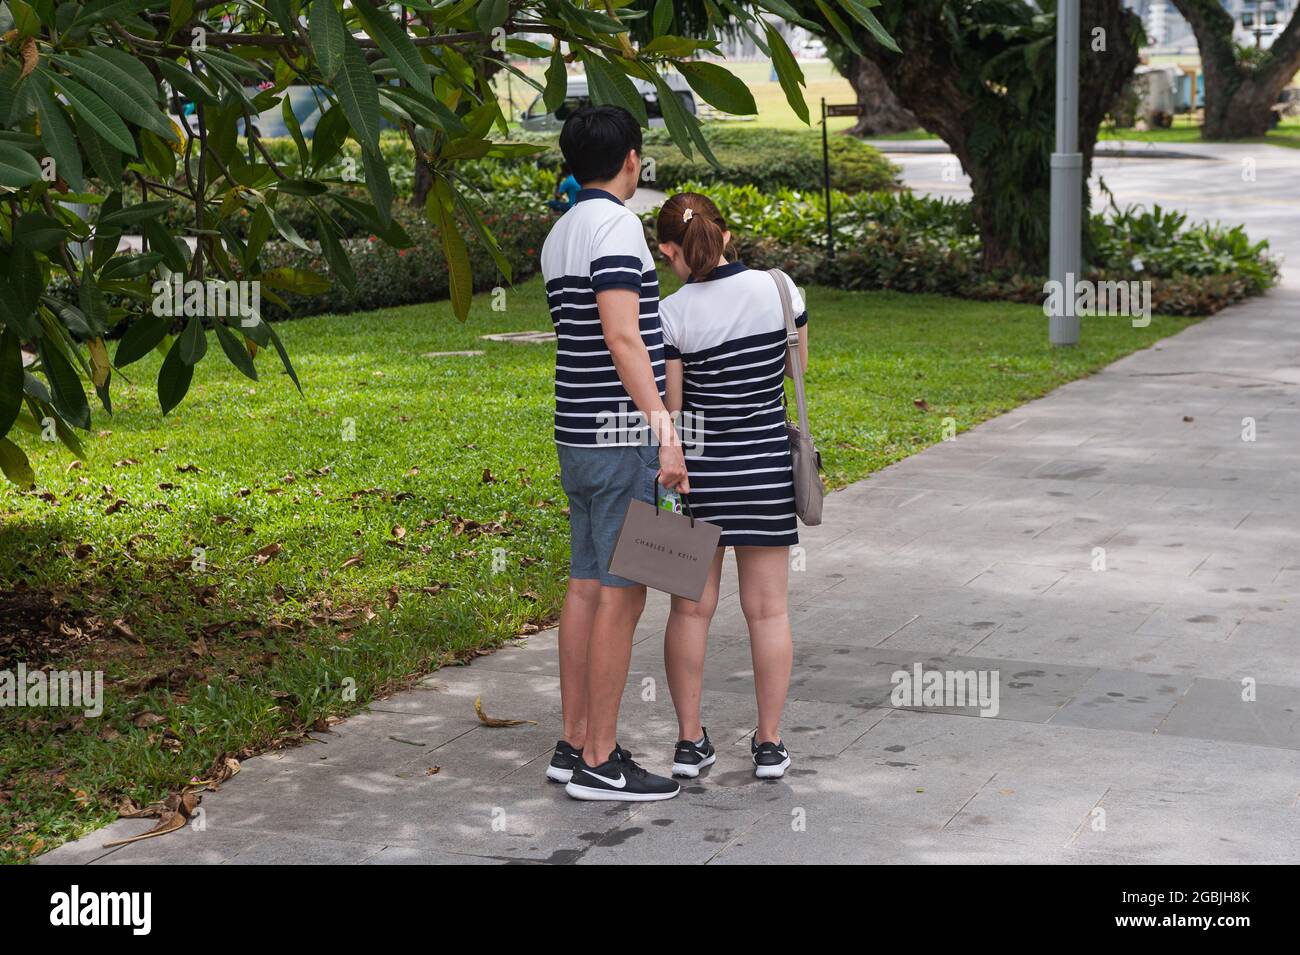 10.02.2018, Singapore, Republic of Singapore, Asia - A young couple wearing fashionable matching clothes is seen standing in a park in the city centre. Stock Photo